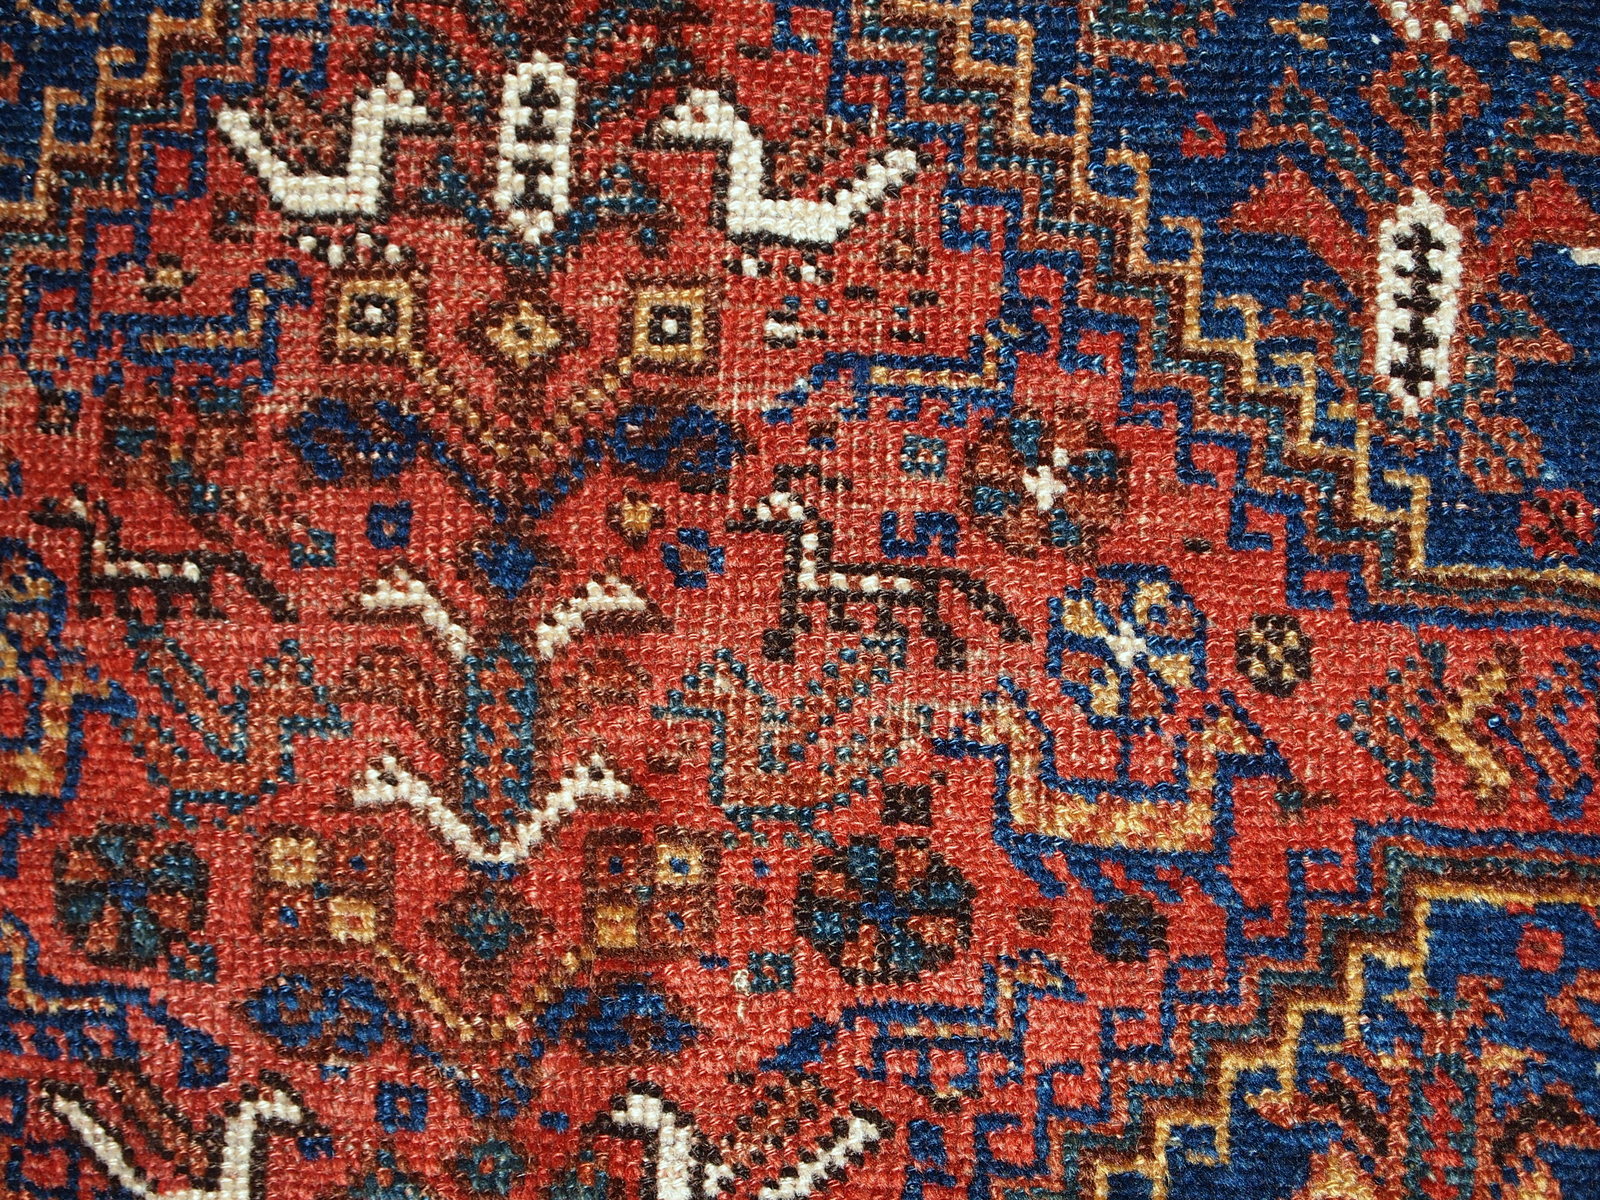 Handmade antique Khamseh rug from the beginning of 20th century with symmetric design and deep shades. The rug has some low pile.